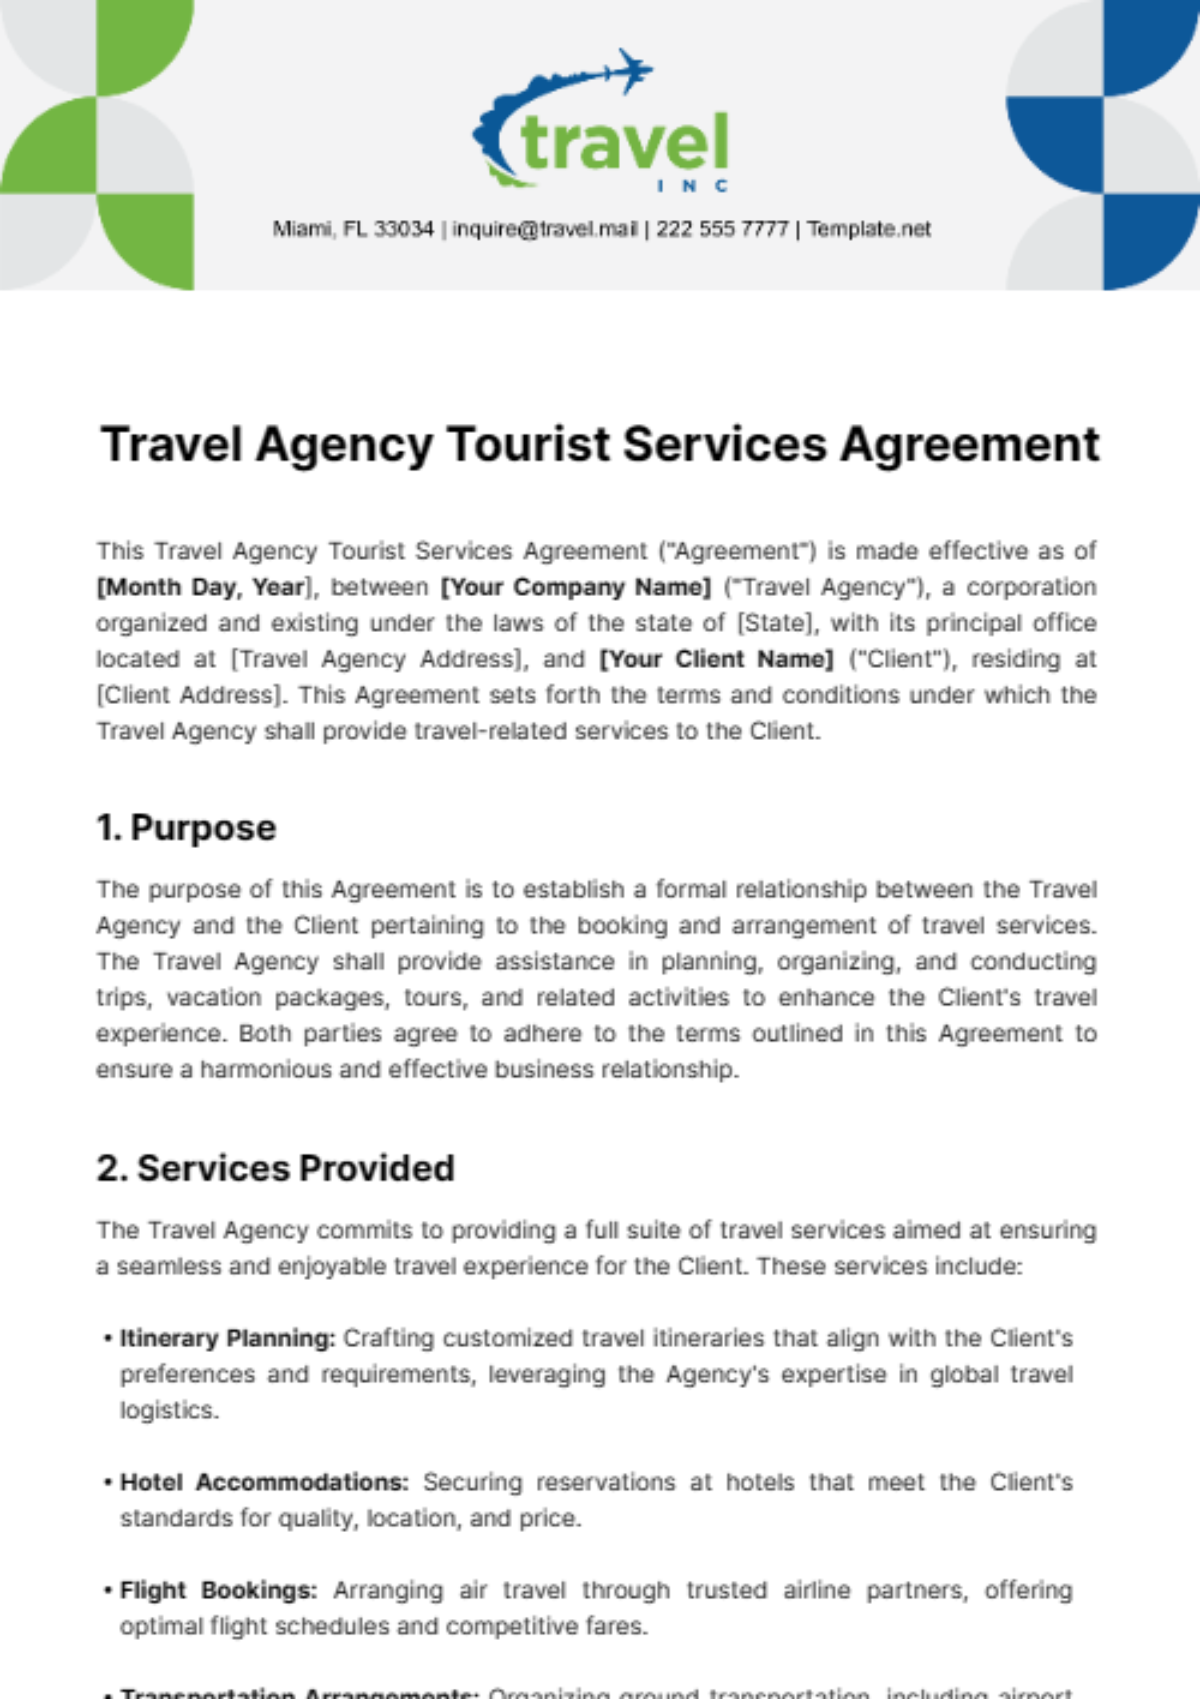 Free Travel Agency Tourist Services Agreement Template